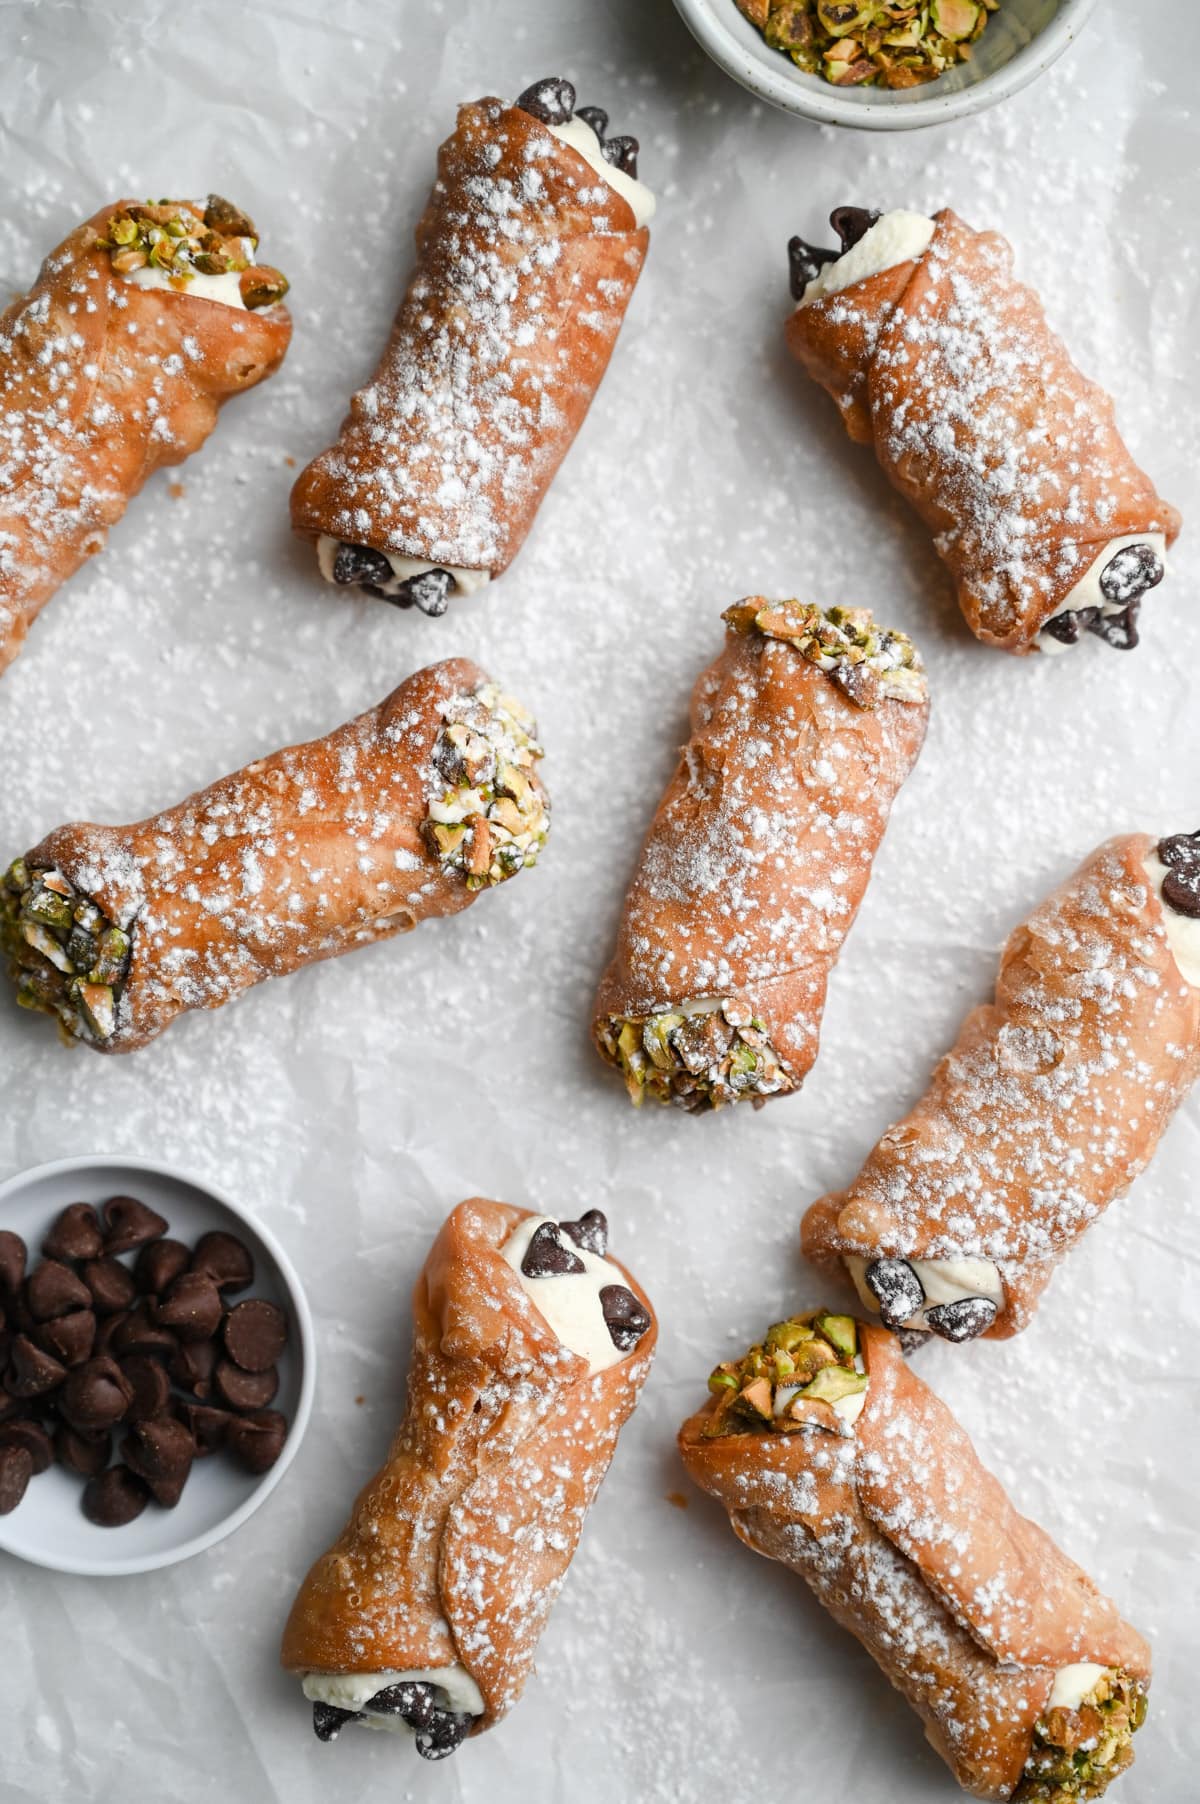 Overhead view of cannoli with ricotta mascarpone filling decorated with pistachios and chocolate chips.